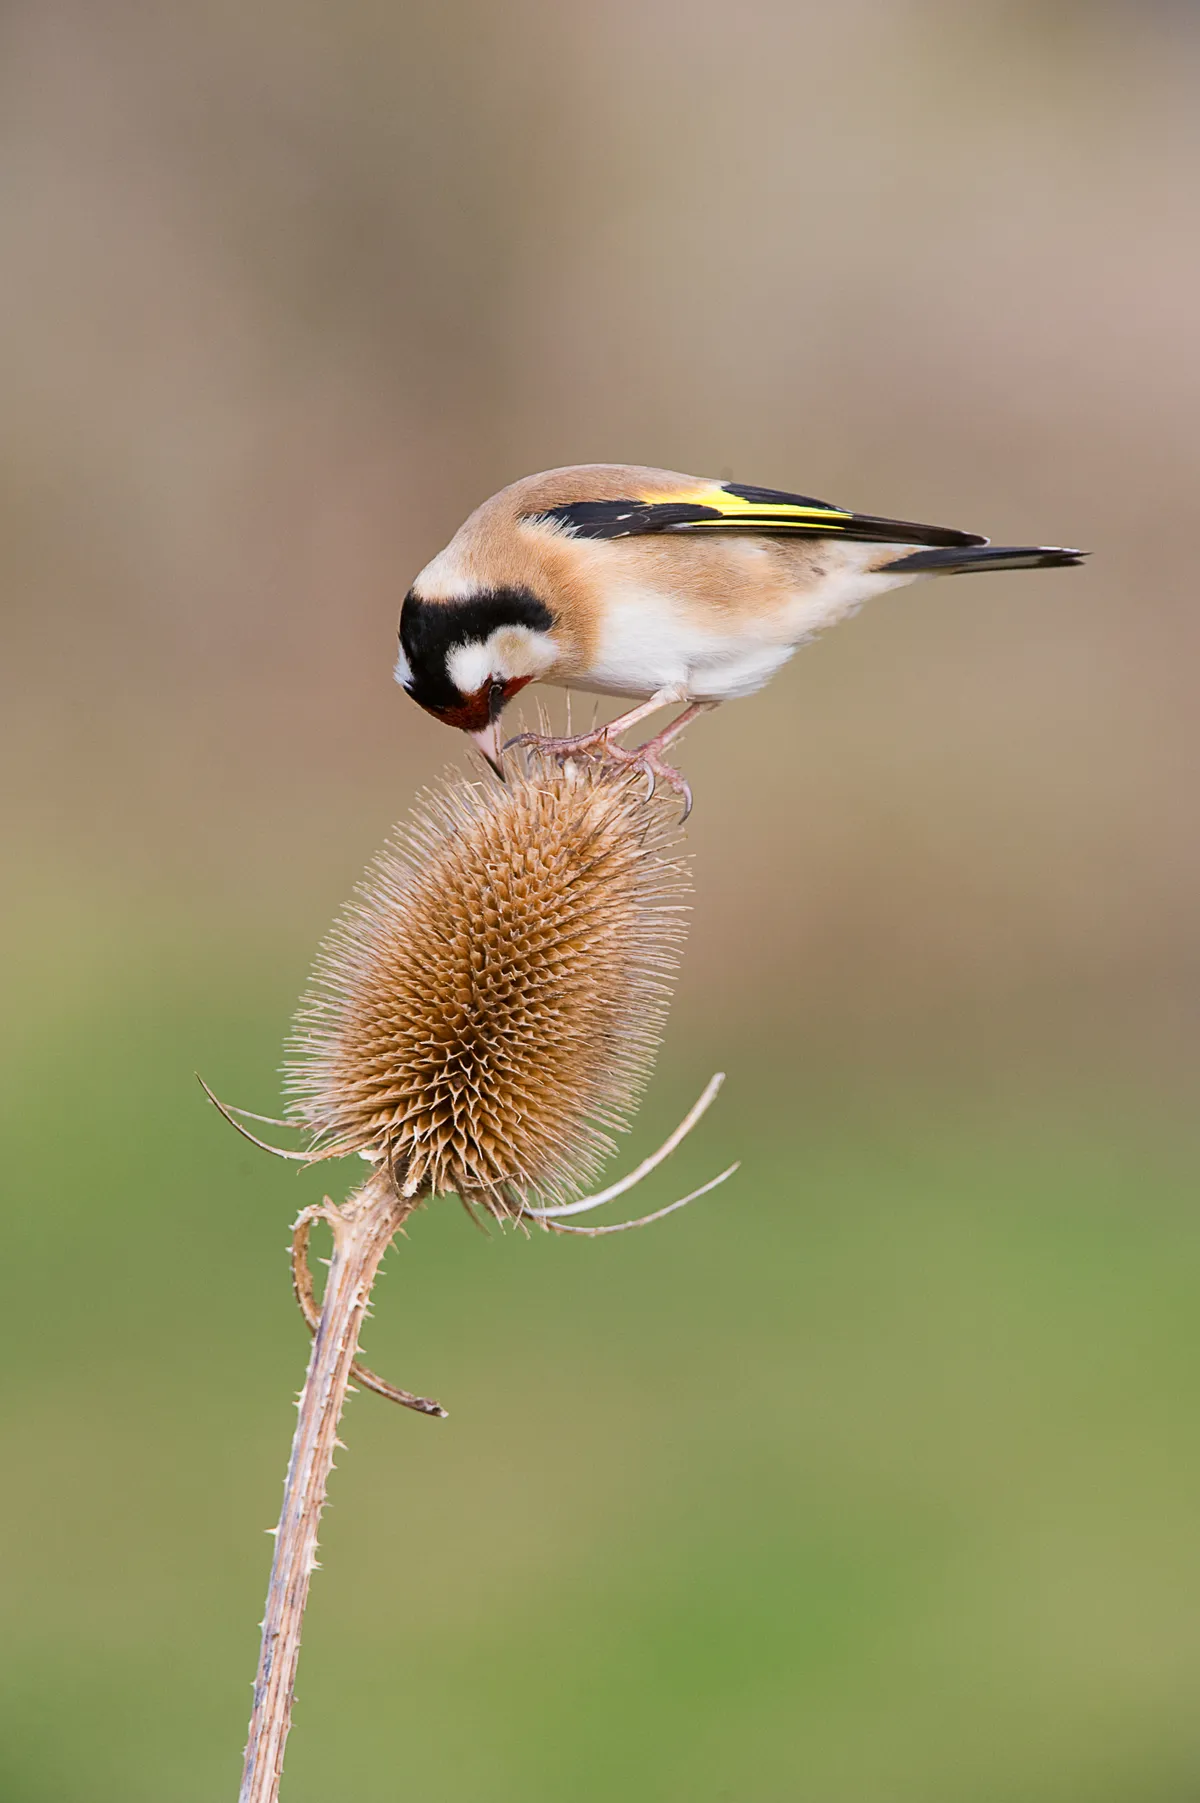 Gold finch on teasel